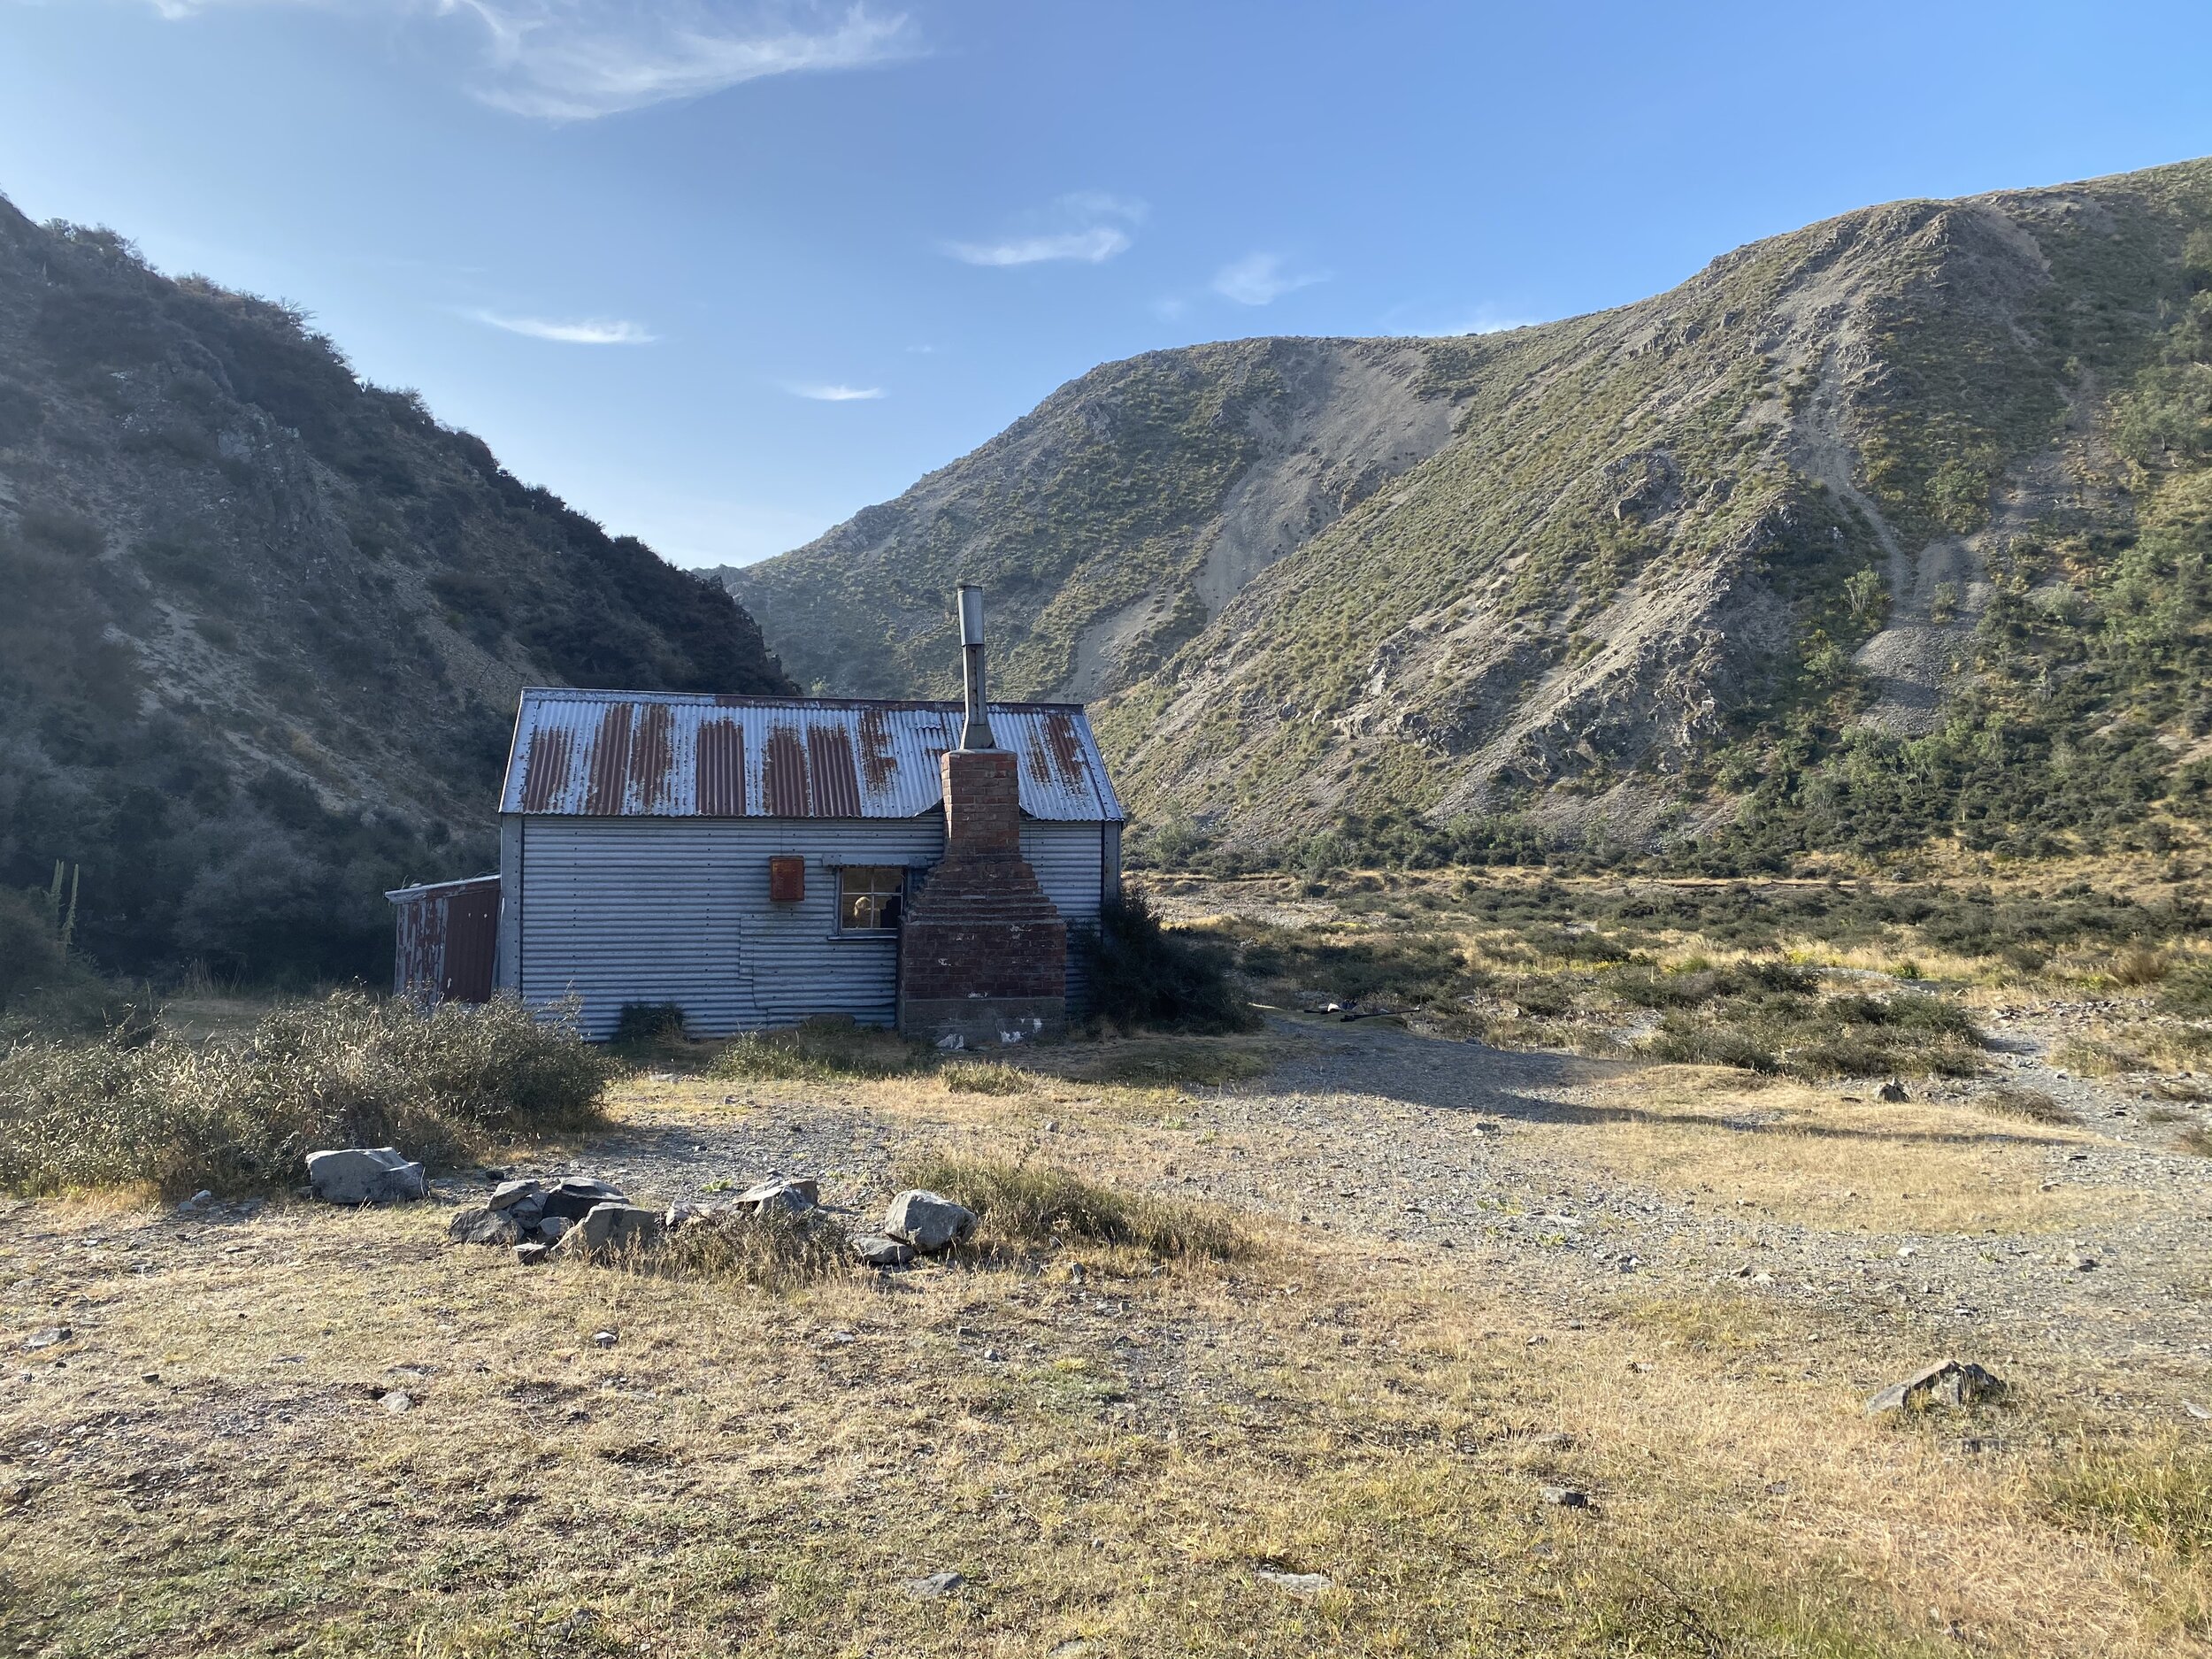 Manuka Hut - no dogs allowed to stay at the hut